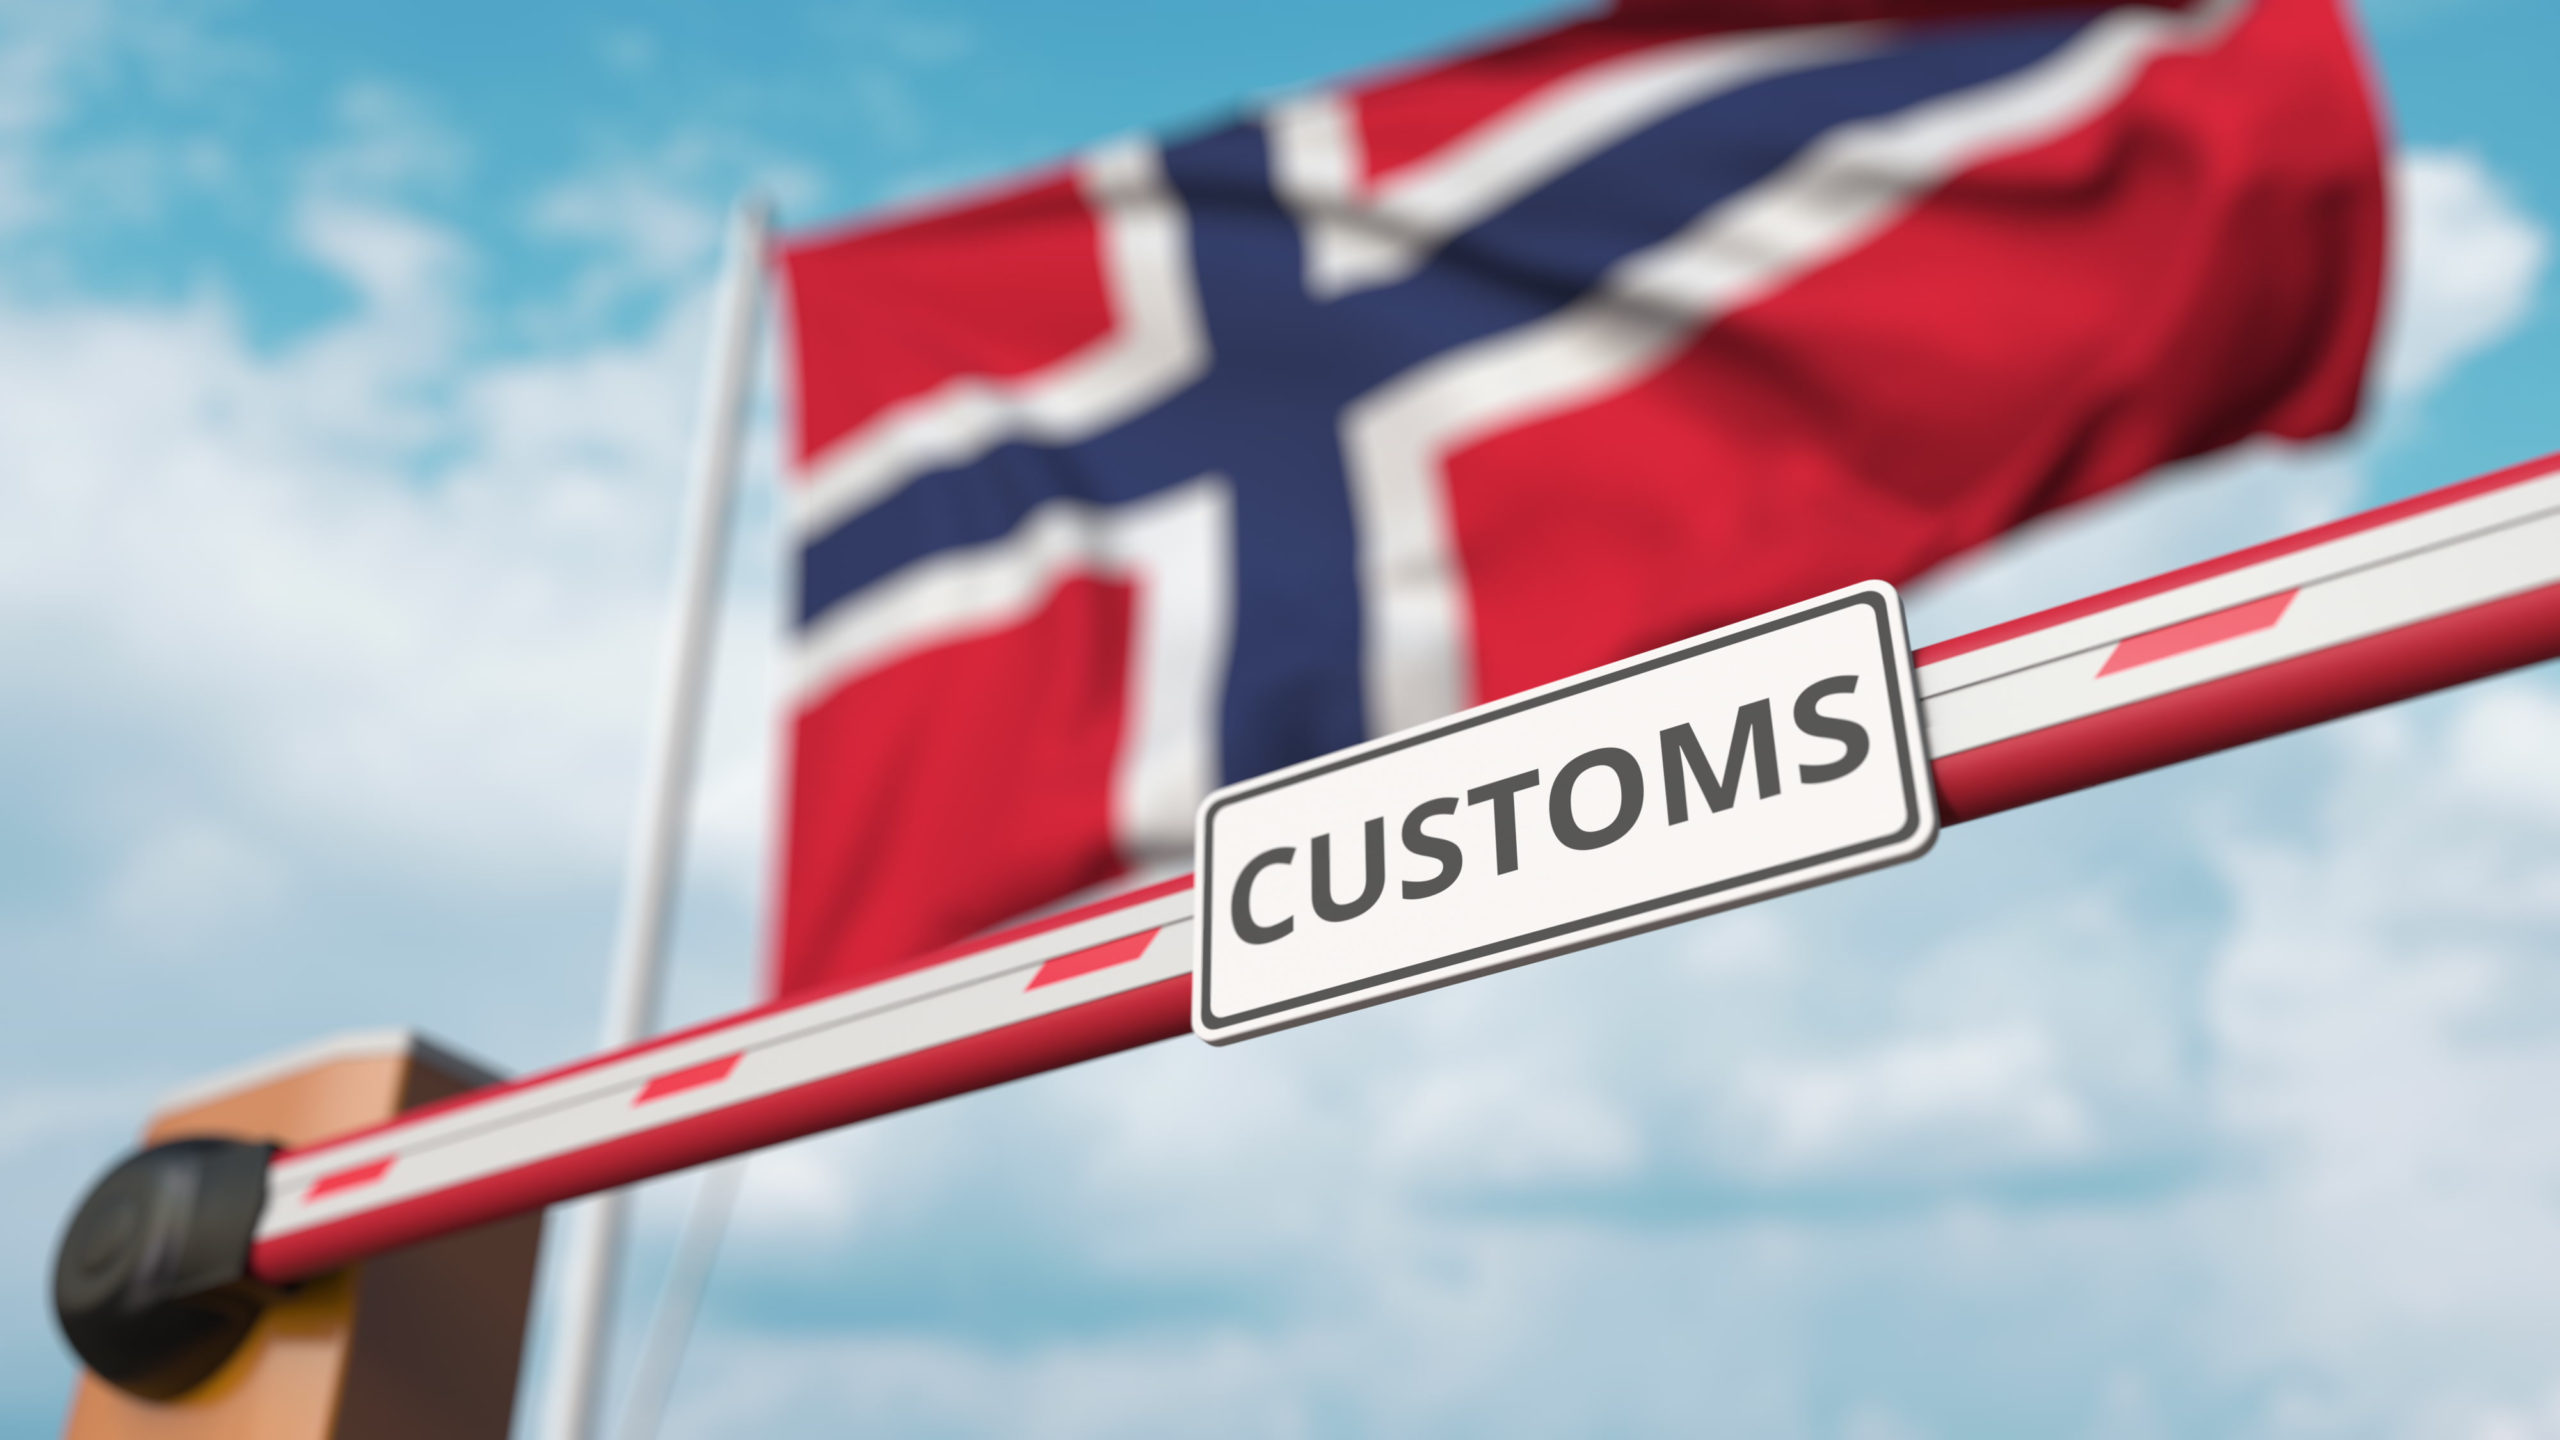 Norway is imposing tighter border restrictions during the Covid-19 pandemic